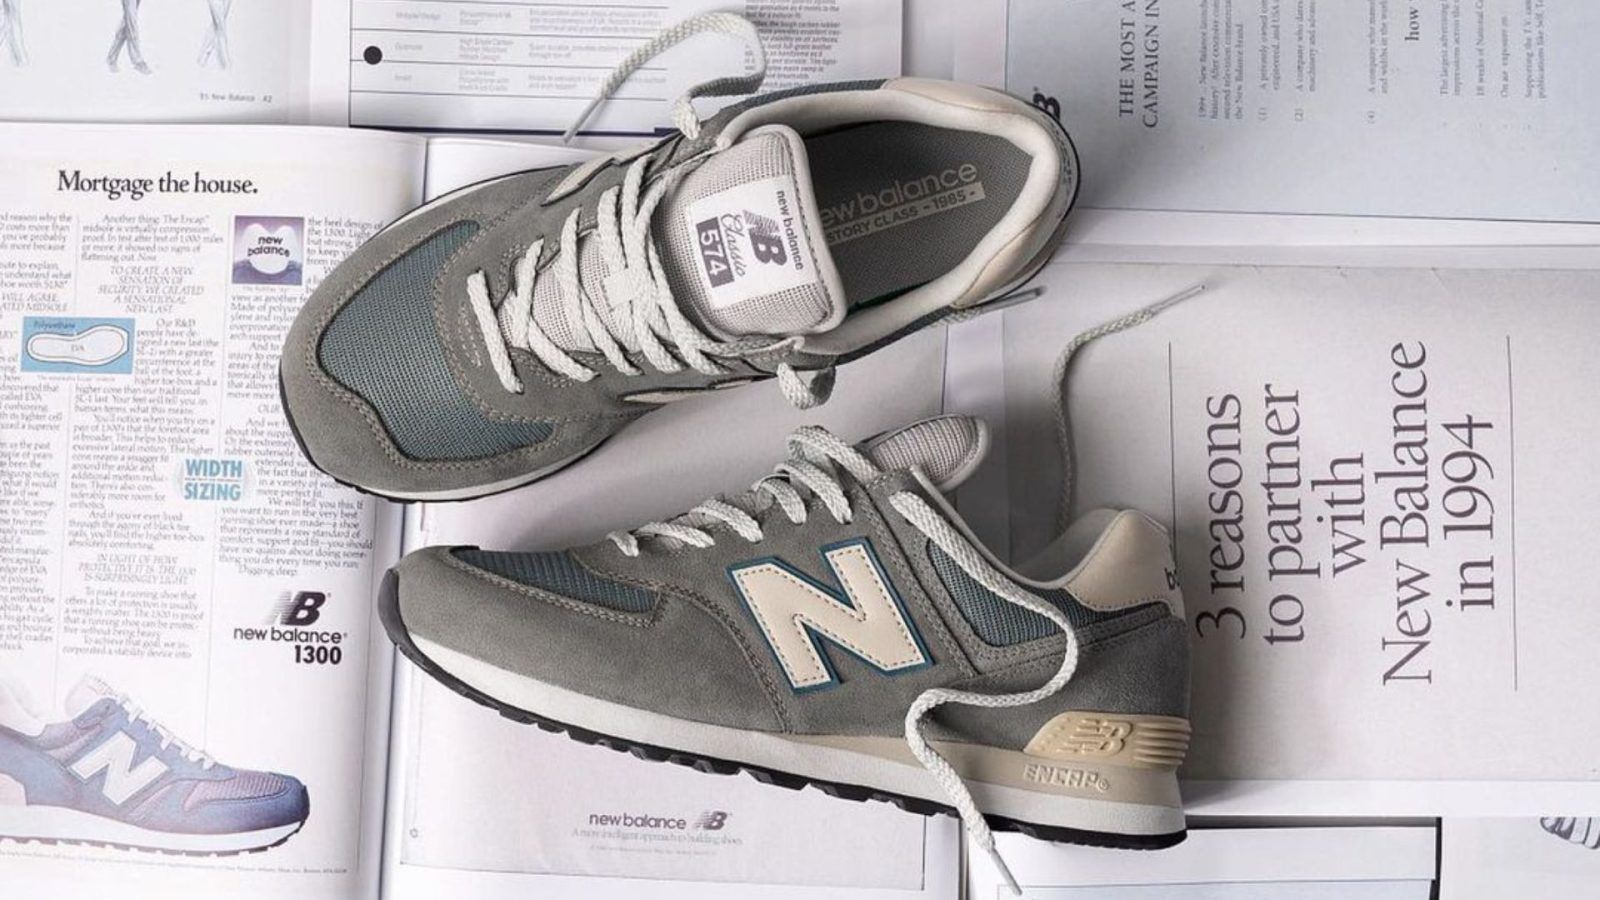 10 iconic New Balance sneakers that live up to the hype